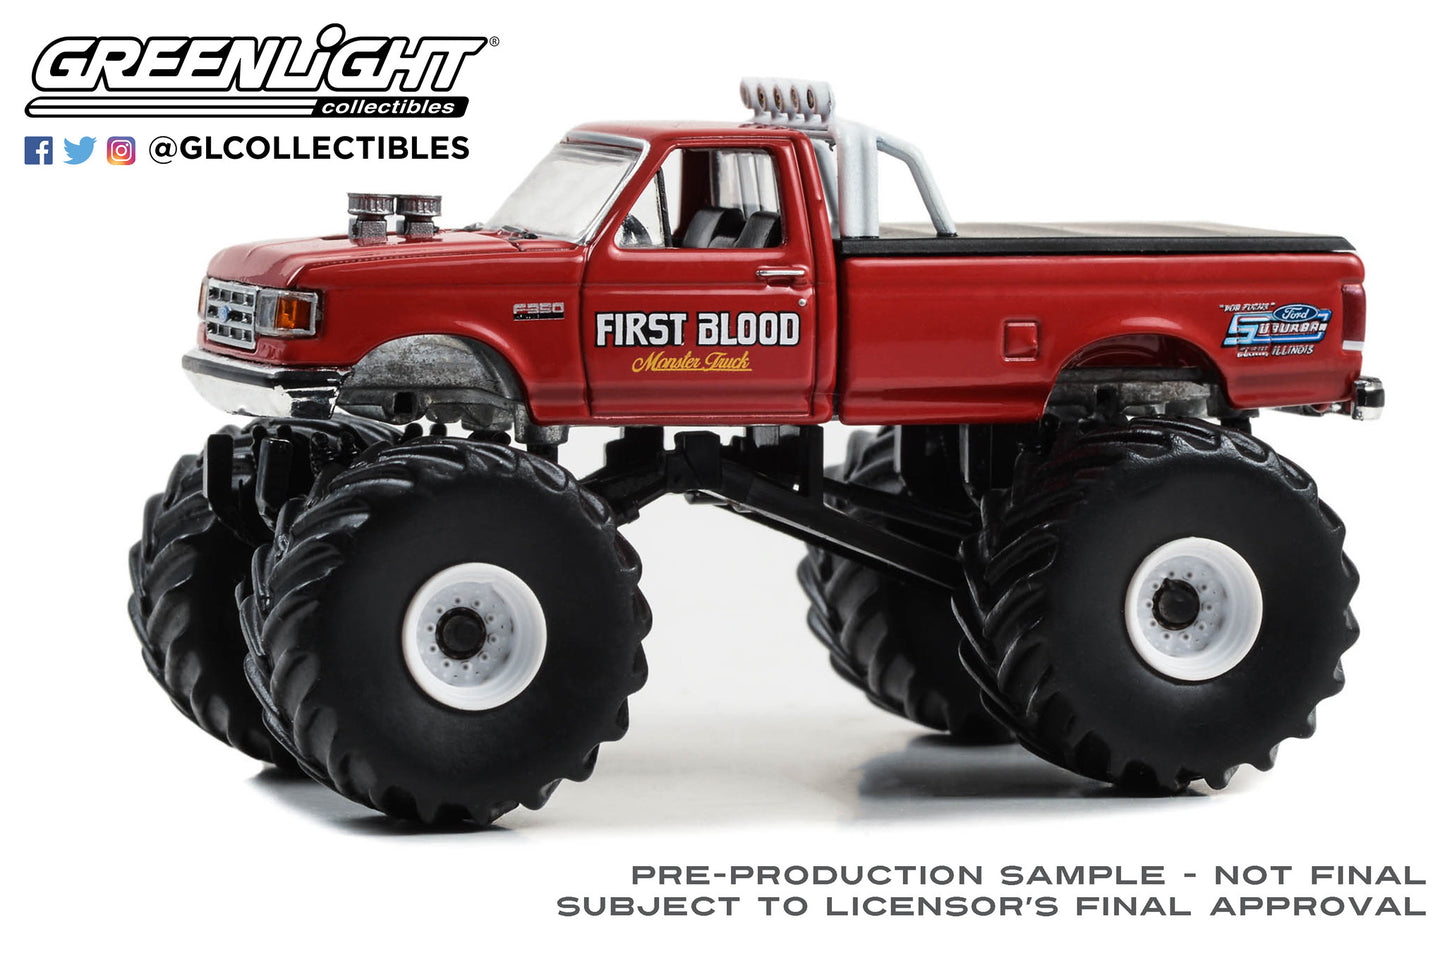 GreenLight 1:64 Kings of Crunch Series 14 - First Blood - 1990 Ford F-350 49140-F